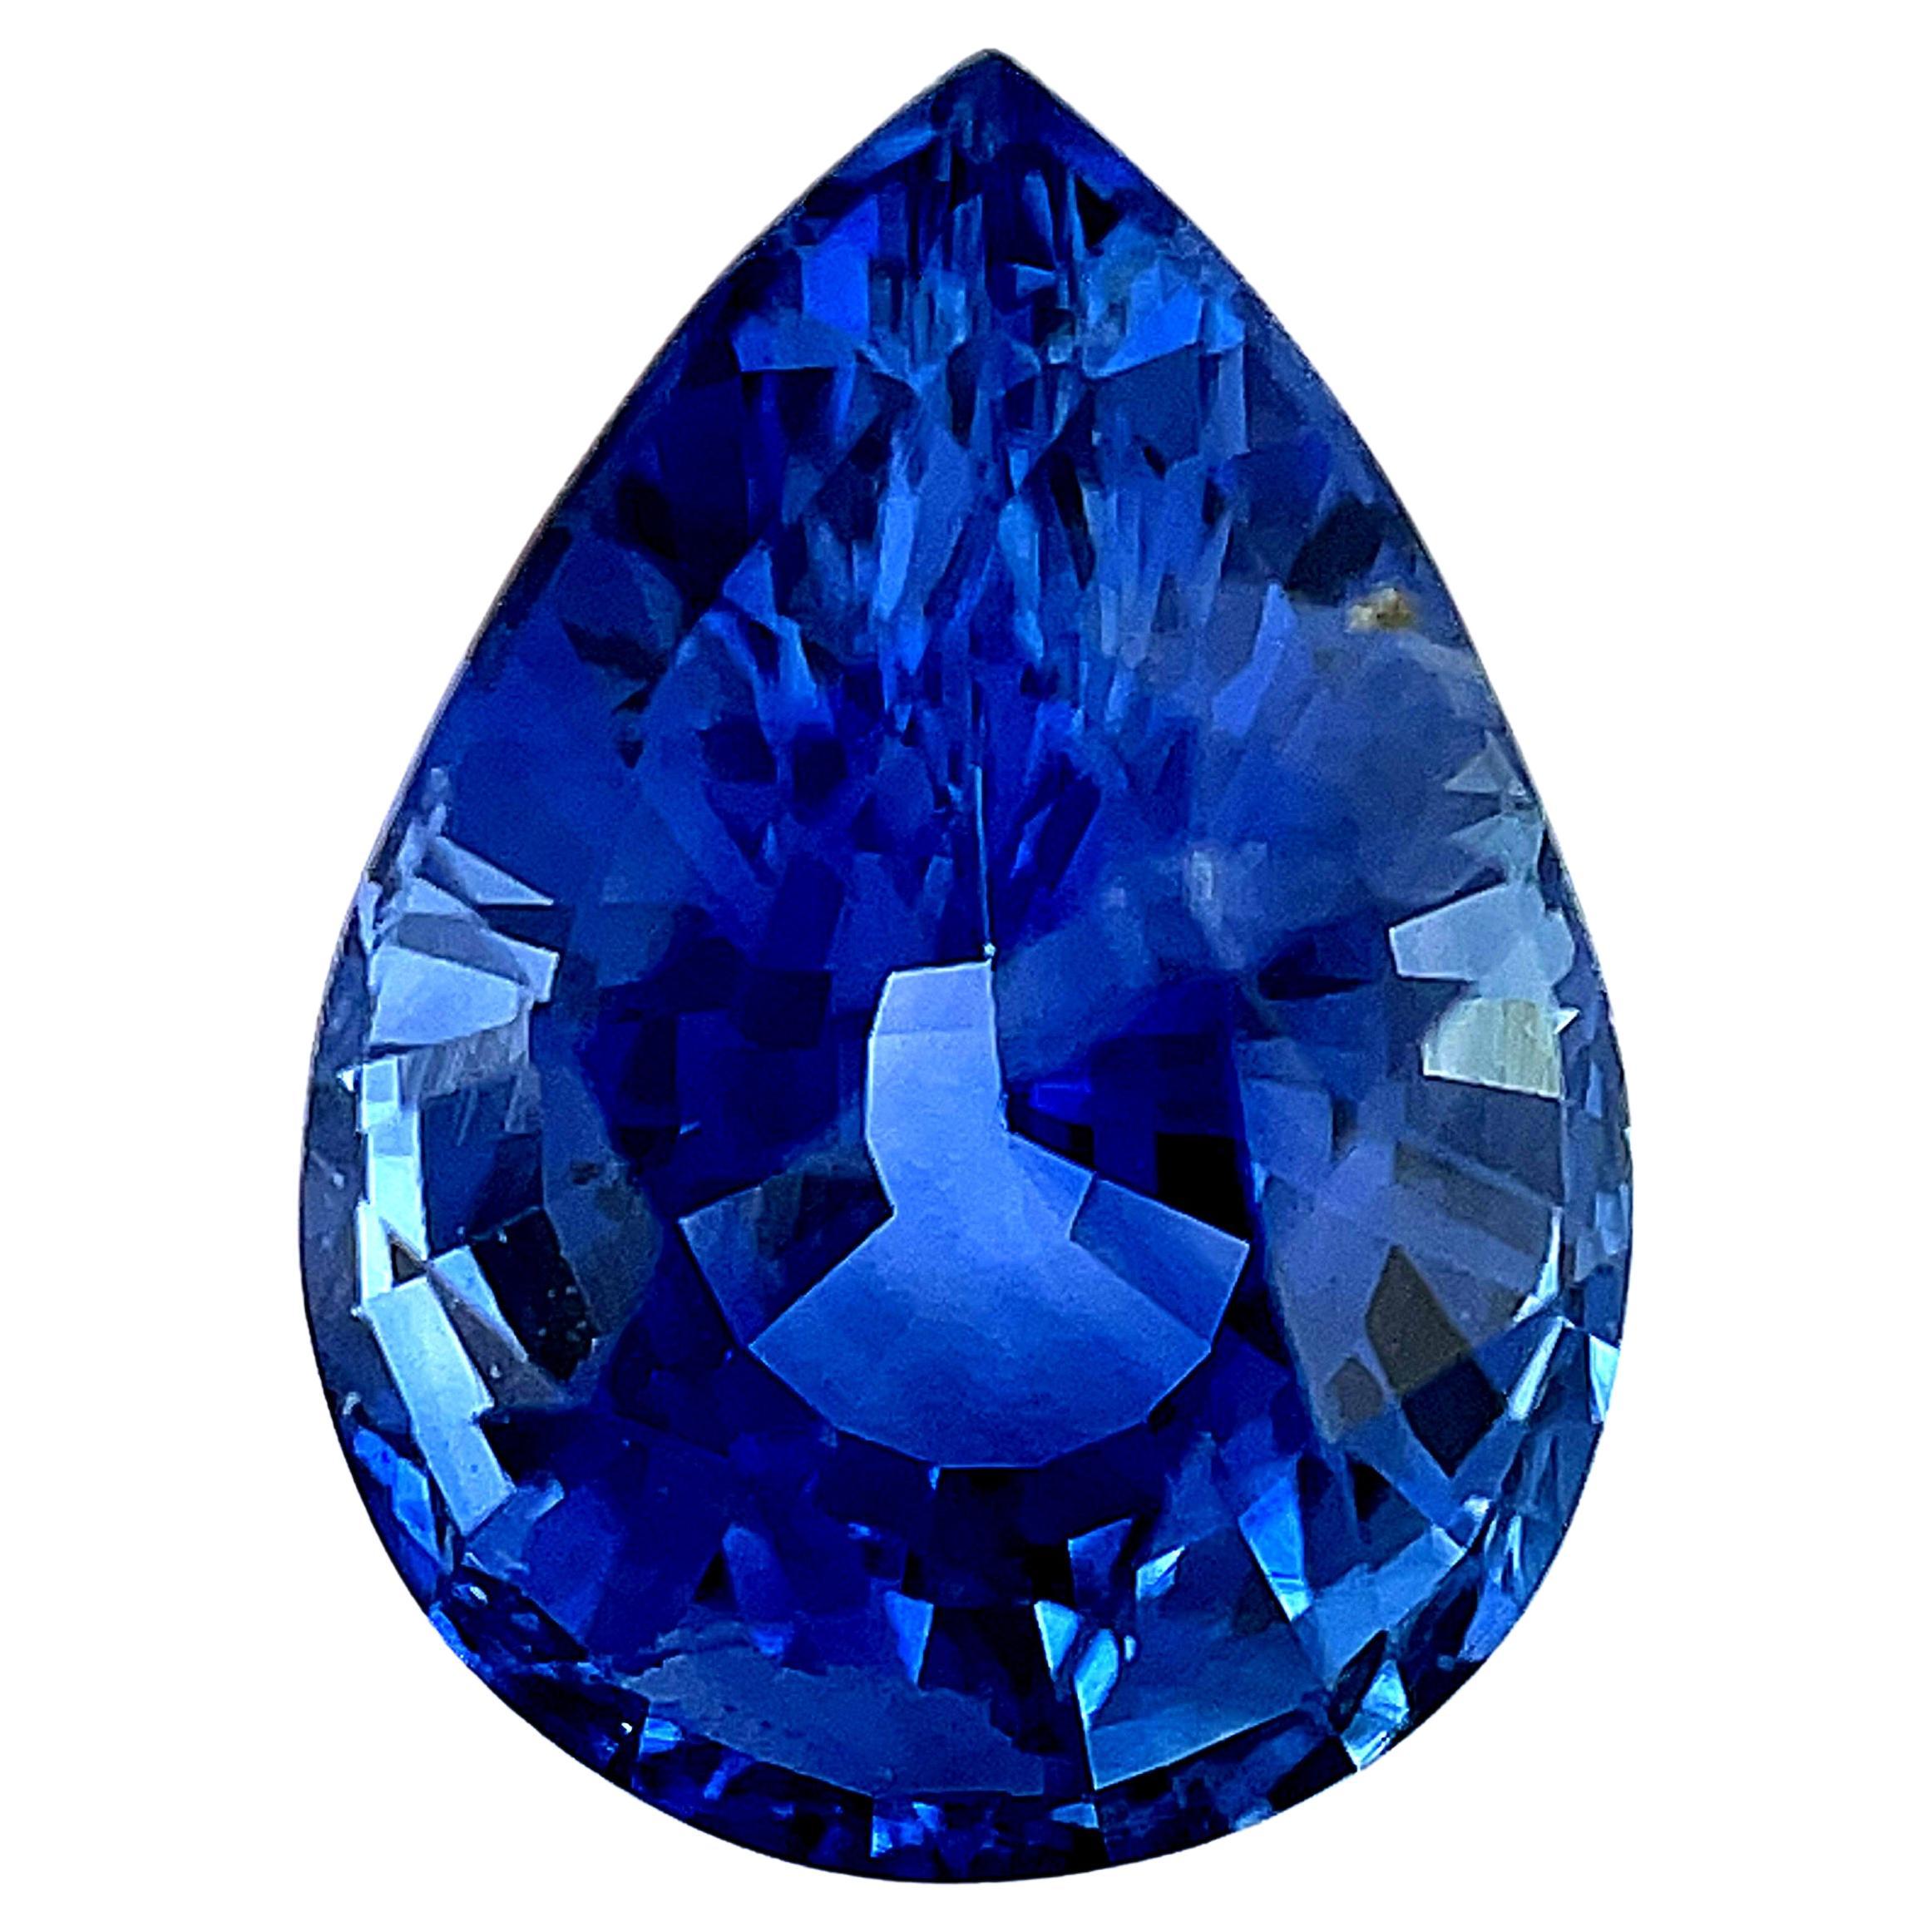 4.18 Carat Unheated Natural Blue Sapphire Pear, Loose Gemstone, GIA Certified